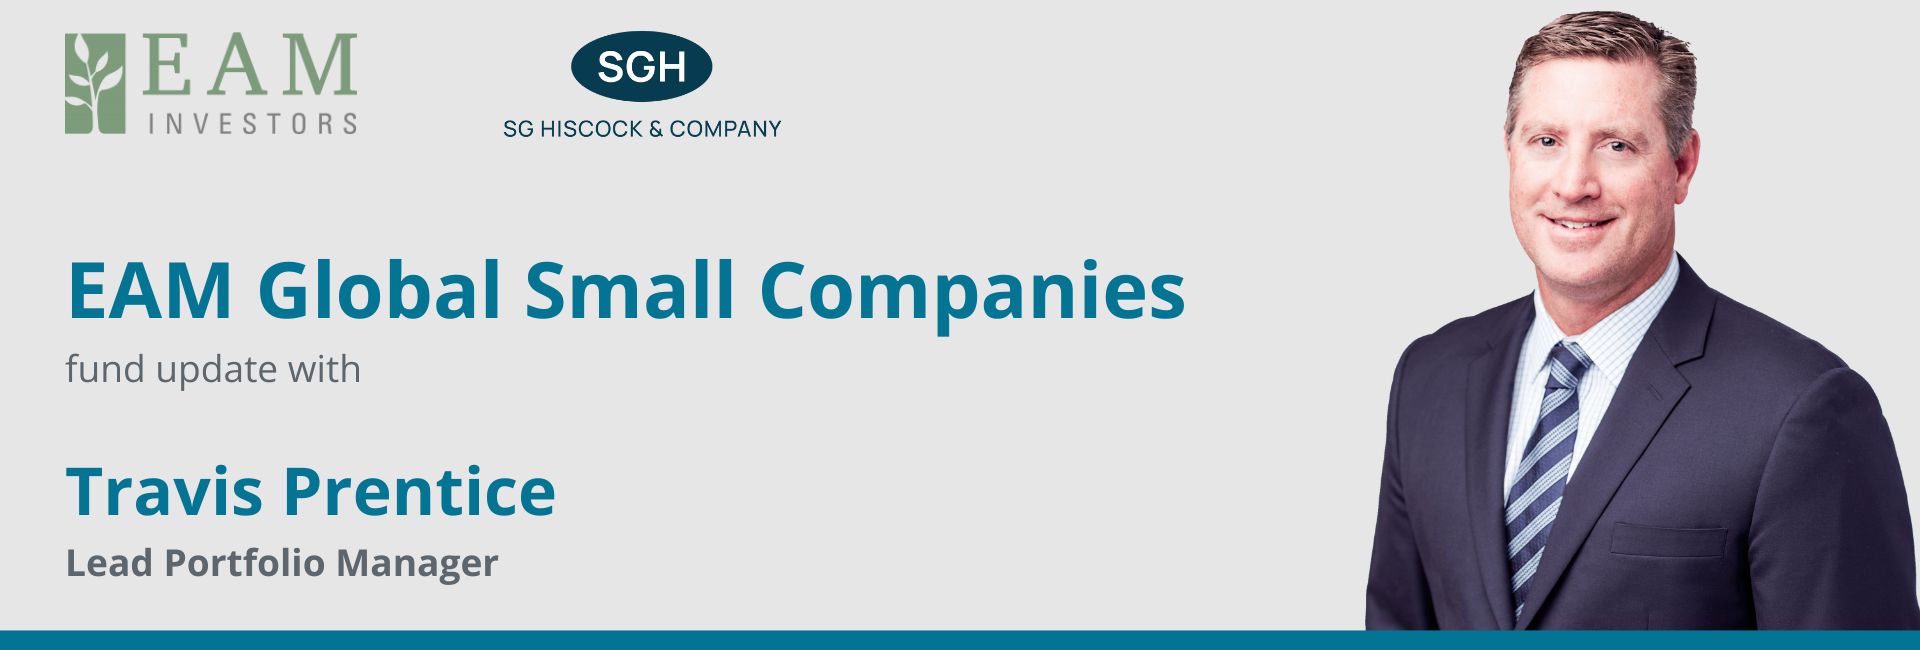 EAM Global Small Companies Fund Update